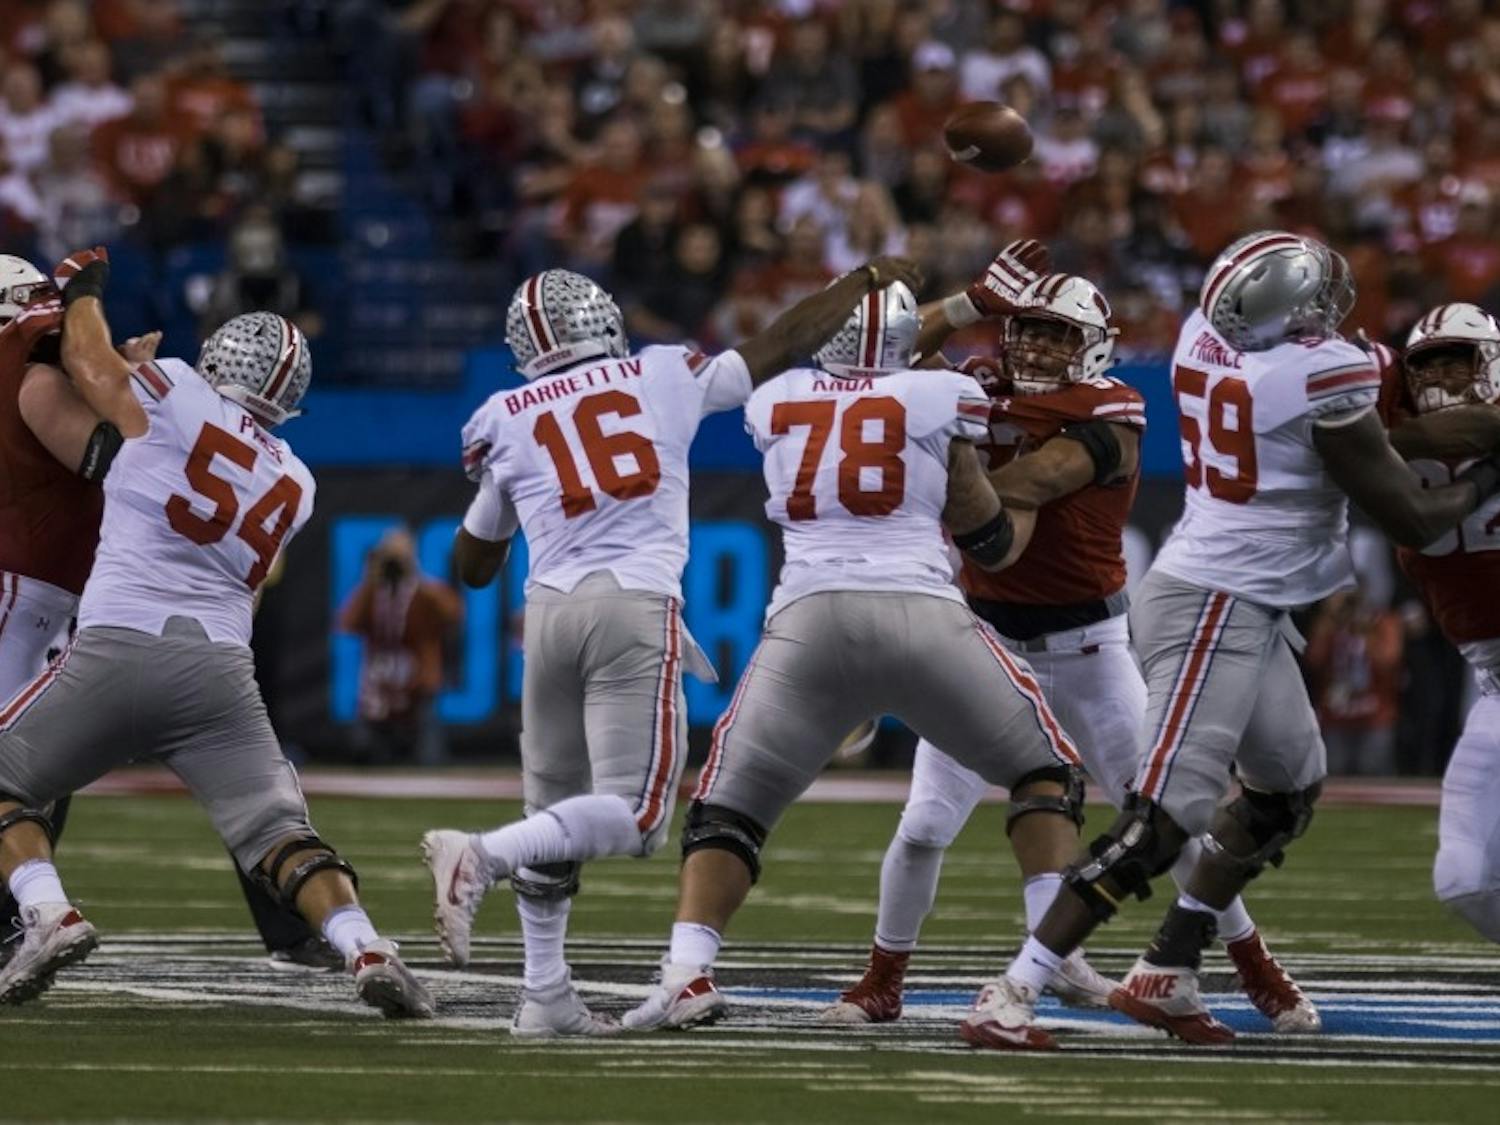 Wisconsin lost its pivotal contest at the hands of J.T. Barrett, but there will always be hope for next year.